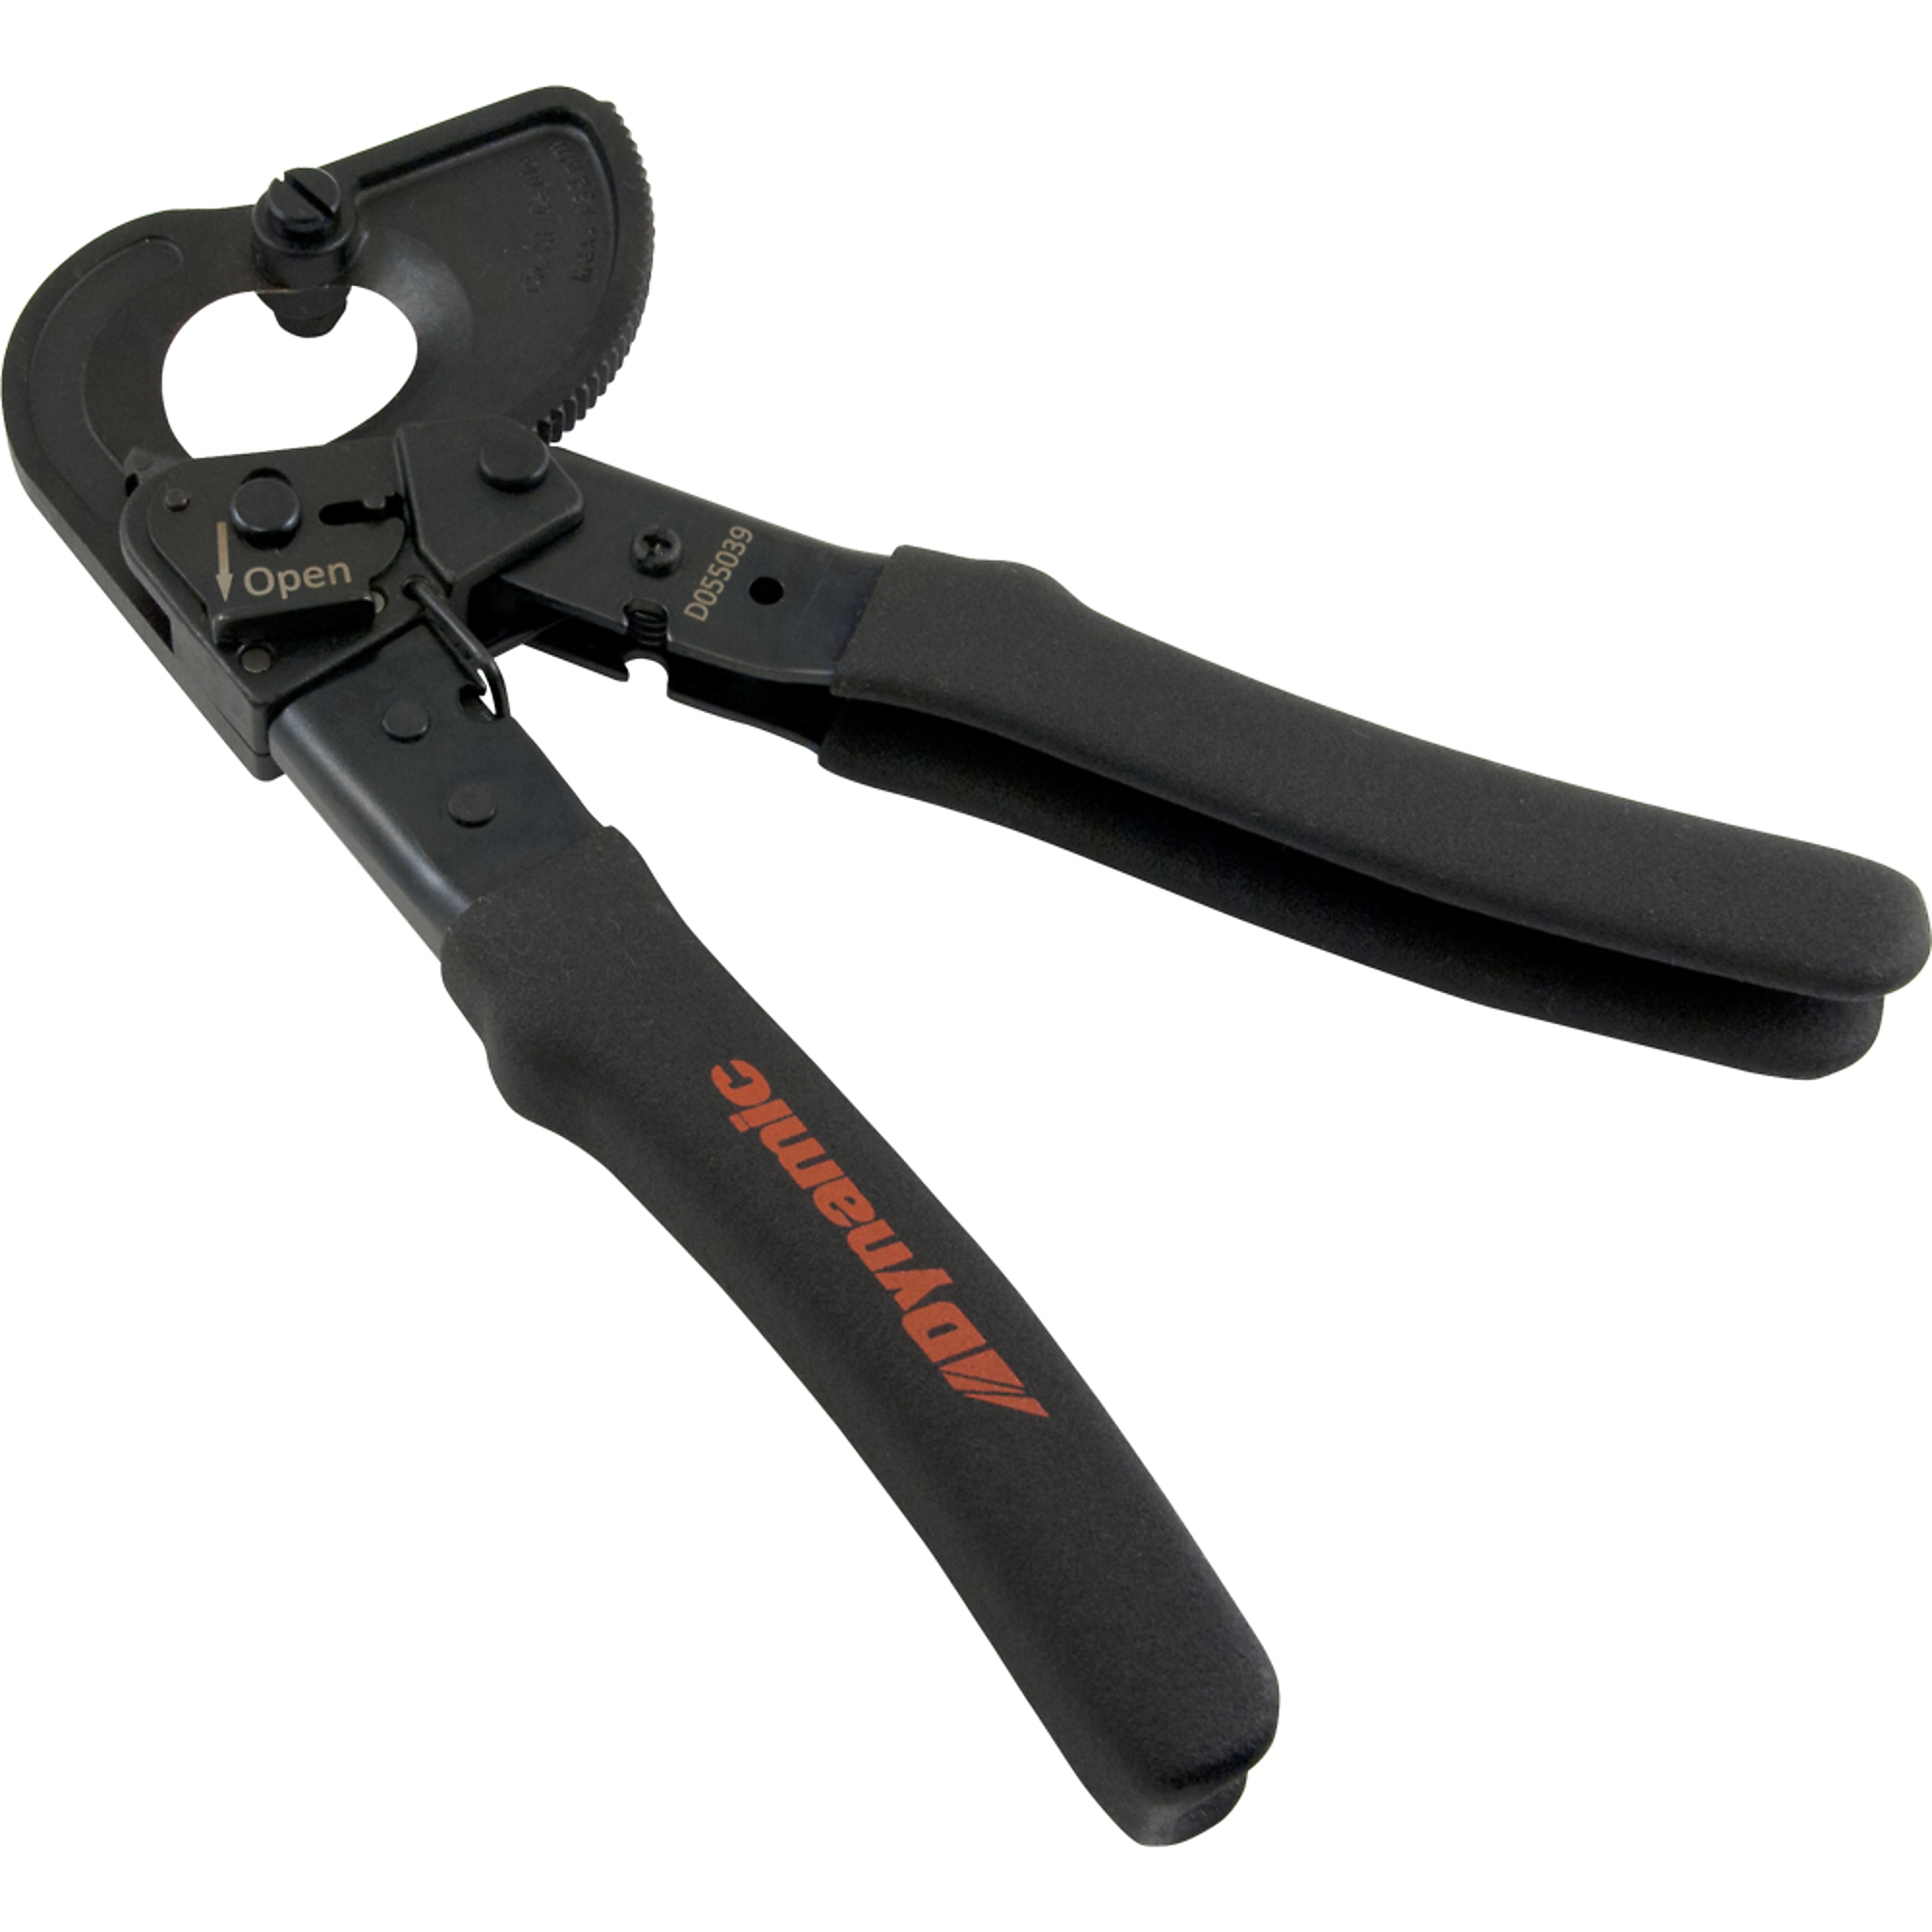 Dynamic Tools, Ratcheting Cable Cutter, 10Inch Long, Blade Size 2 in, Tool Length 10 in, Model D055039